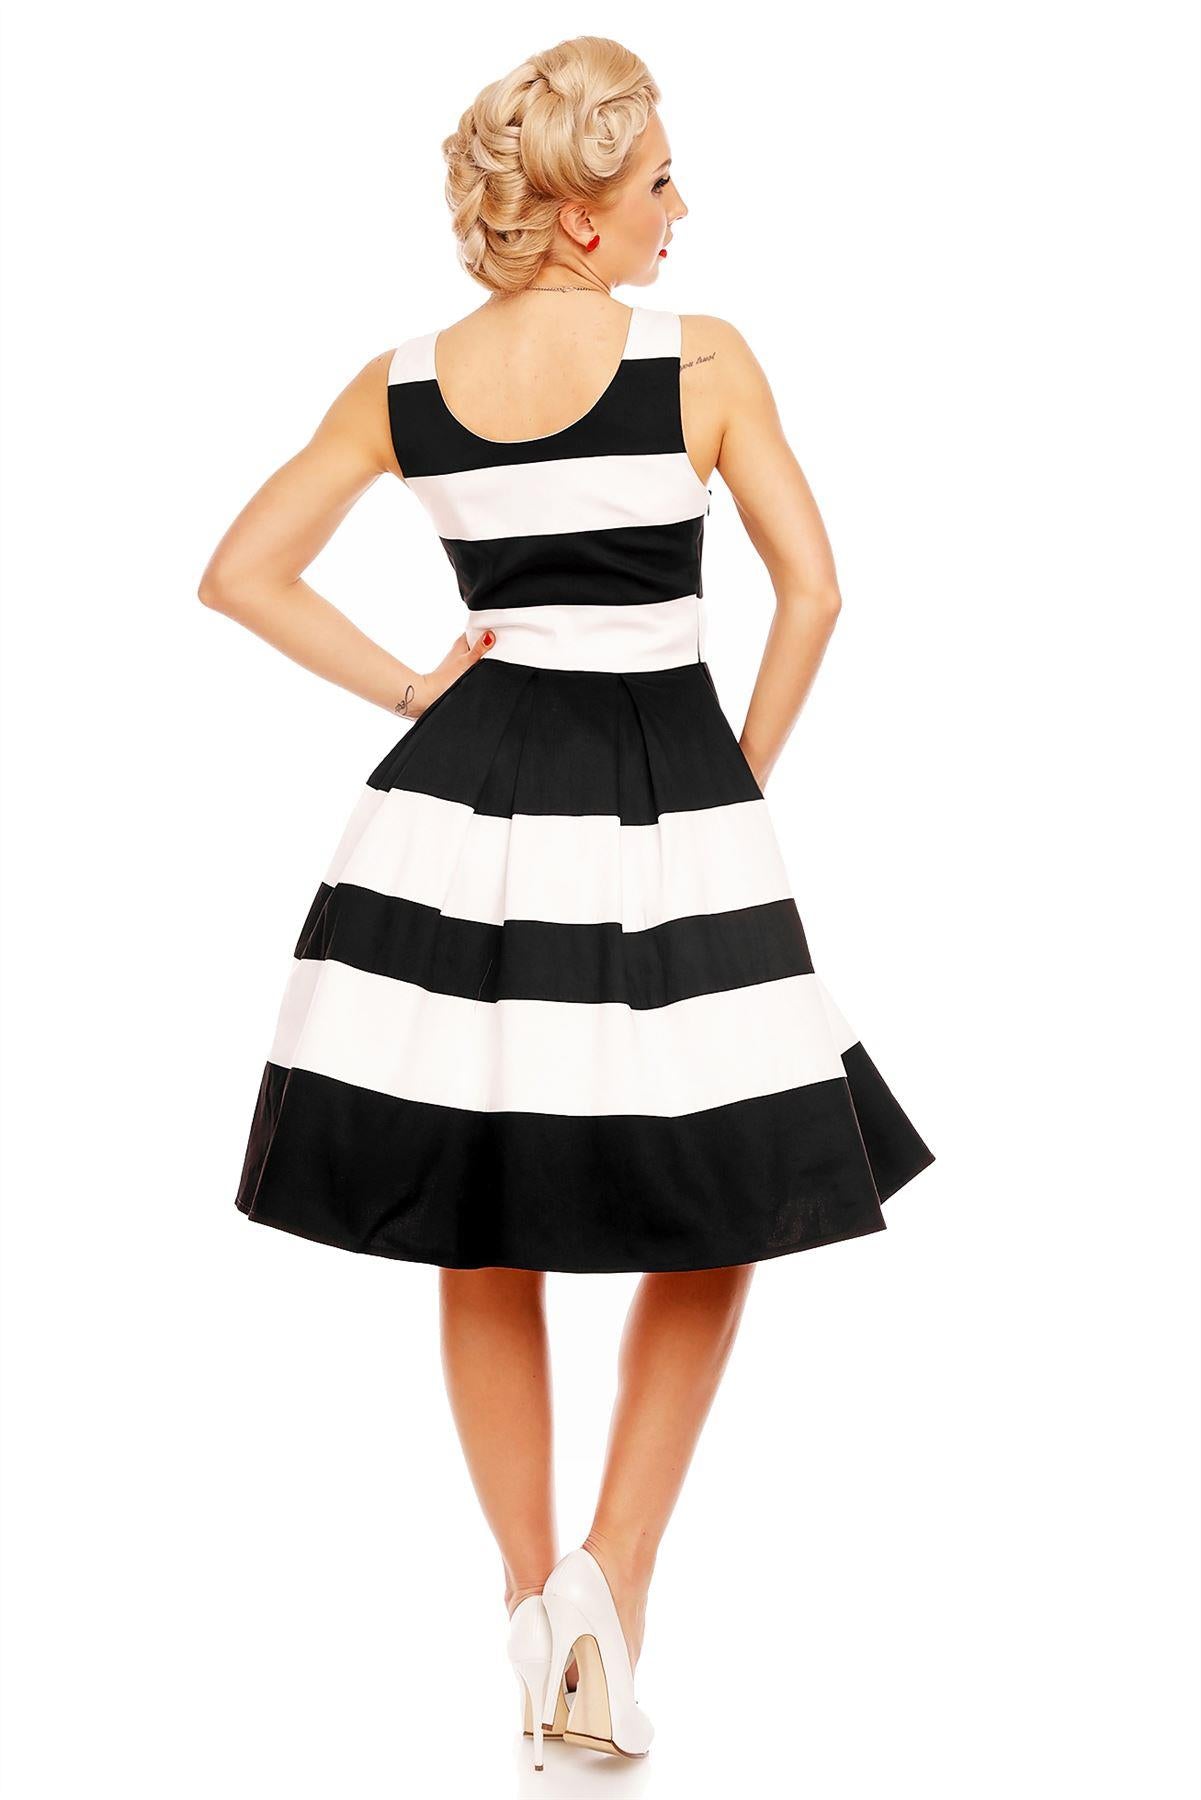 Woma's Striped Two Tone Dress in Black/White